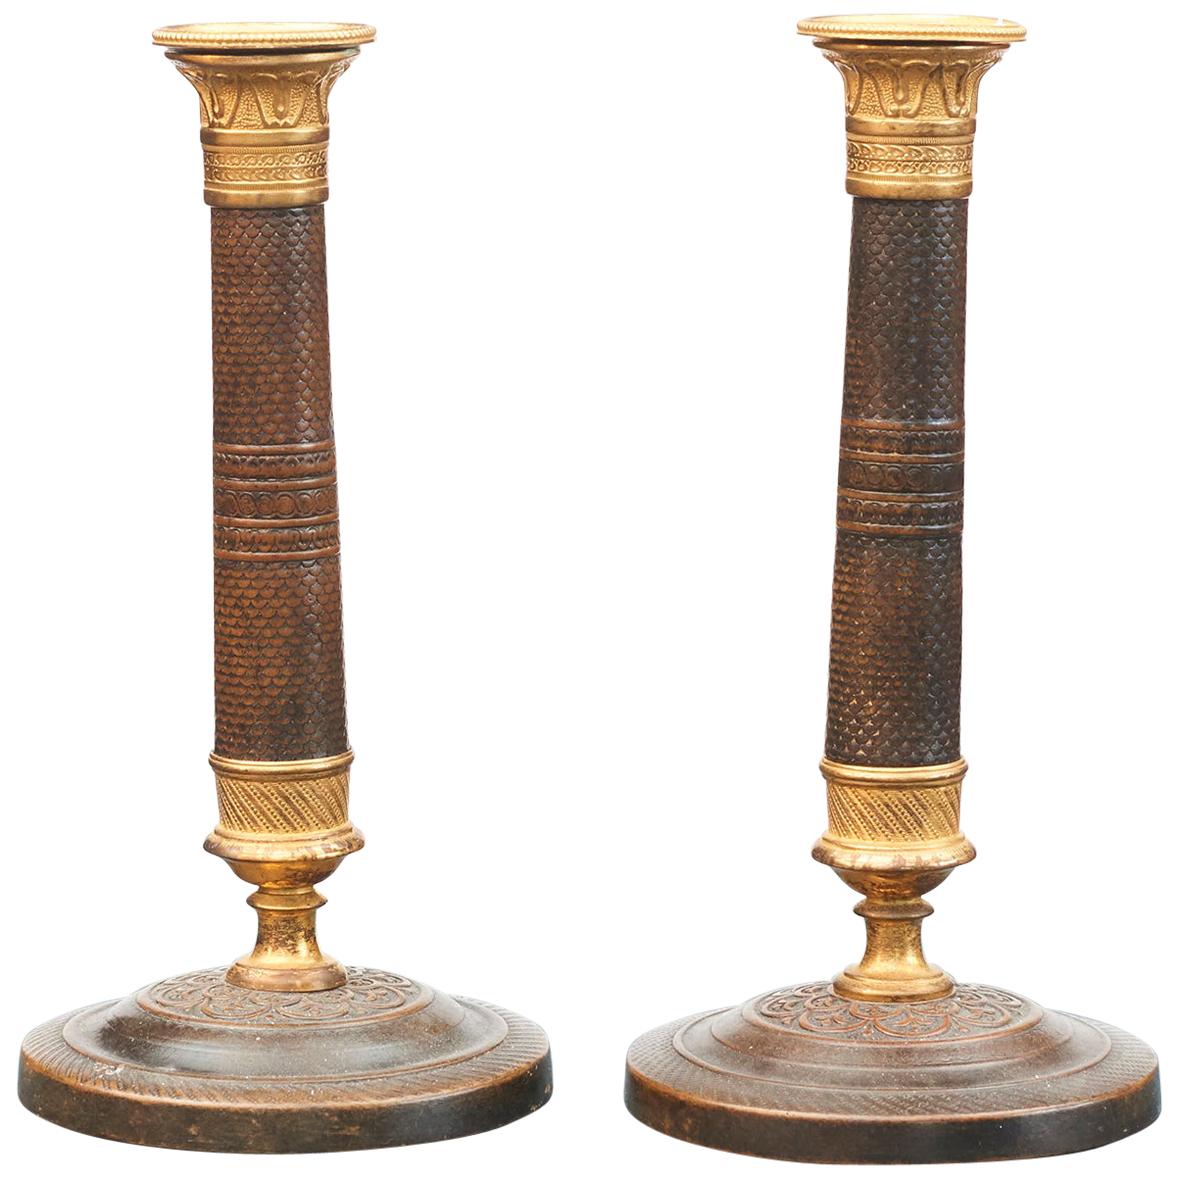 Pair of French Empire Candlesticks in Gilt and Burnished Bronze